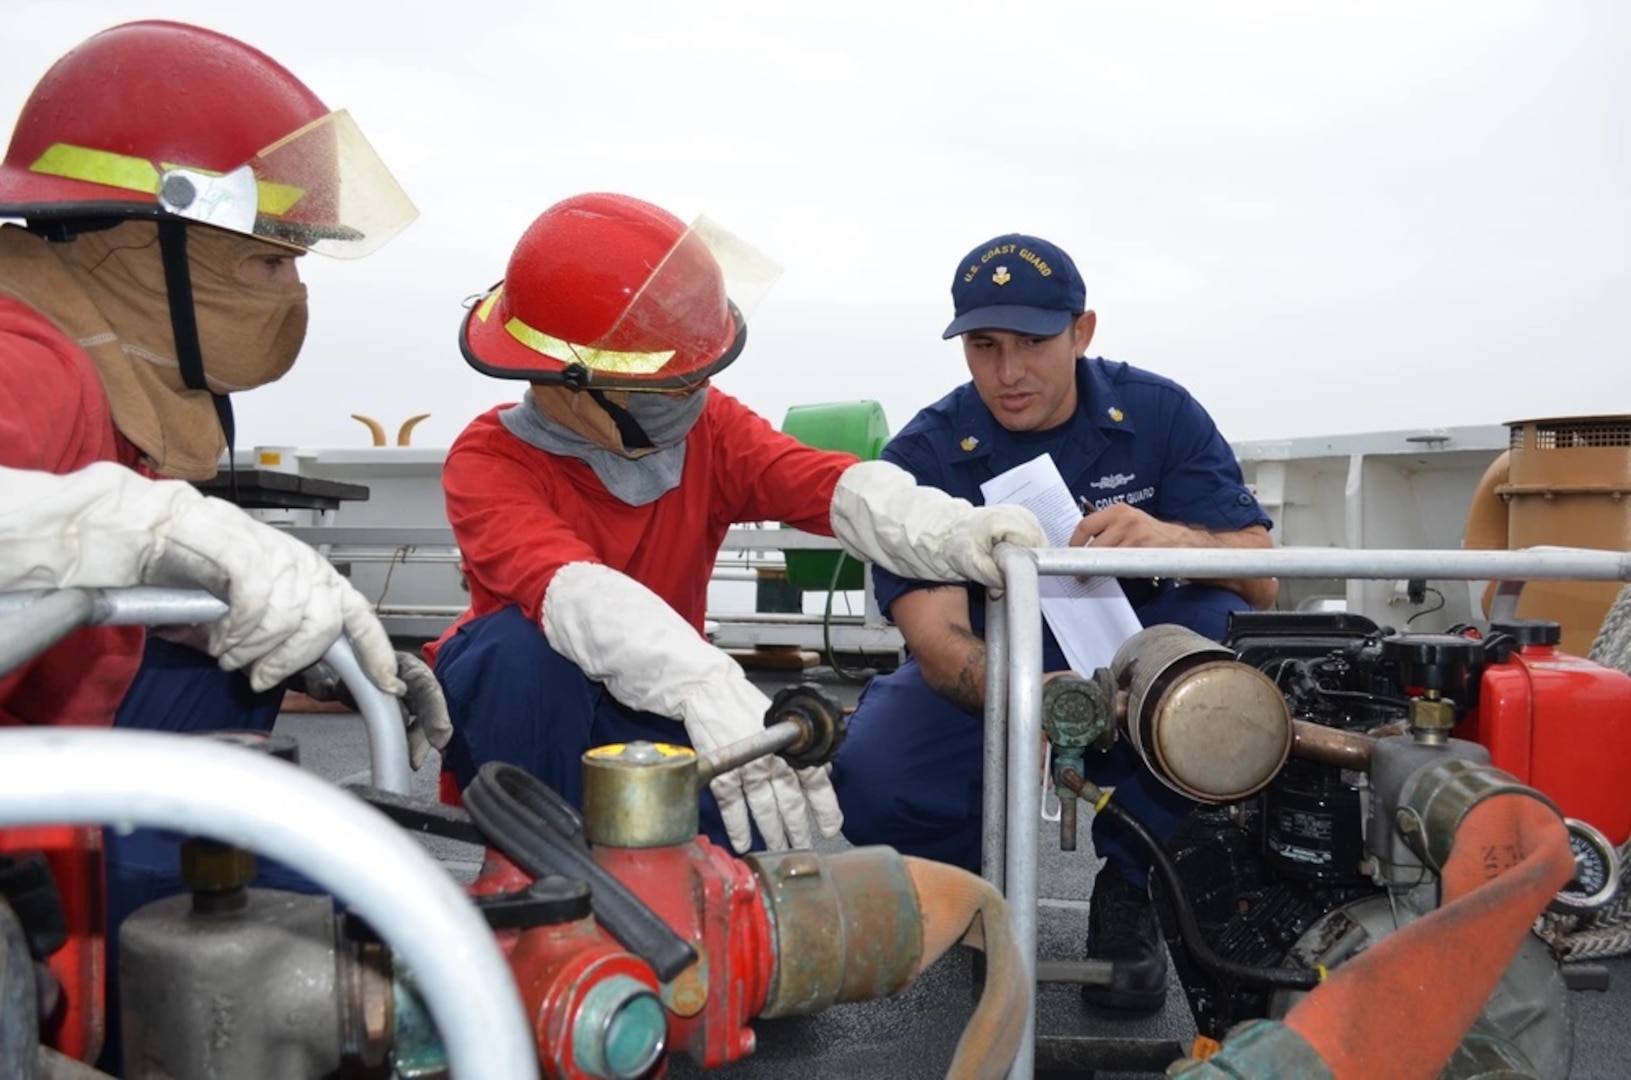 Petty Officer 1st Class Caleb Noriega, of El Paso, Texas, an instructor with the Coast Guard’s Afloat Training Organization, reviews procedures for proper operation of a P-100 dewatering pump with crewmembers from the Coast Guard Cutter Steadfast, a 210-foot medium endurance cutter, during damage control training conducted as part of Command Assessment of Readiness for Training, Sept. 19, 2014. The ATO, part of Force Readiness Command, assesses and prepares shipboard personnel to meet essential operational requirements.